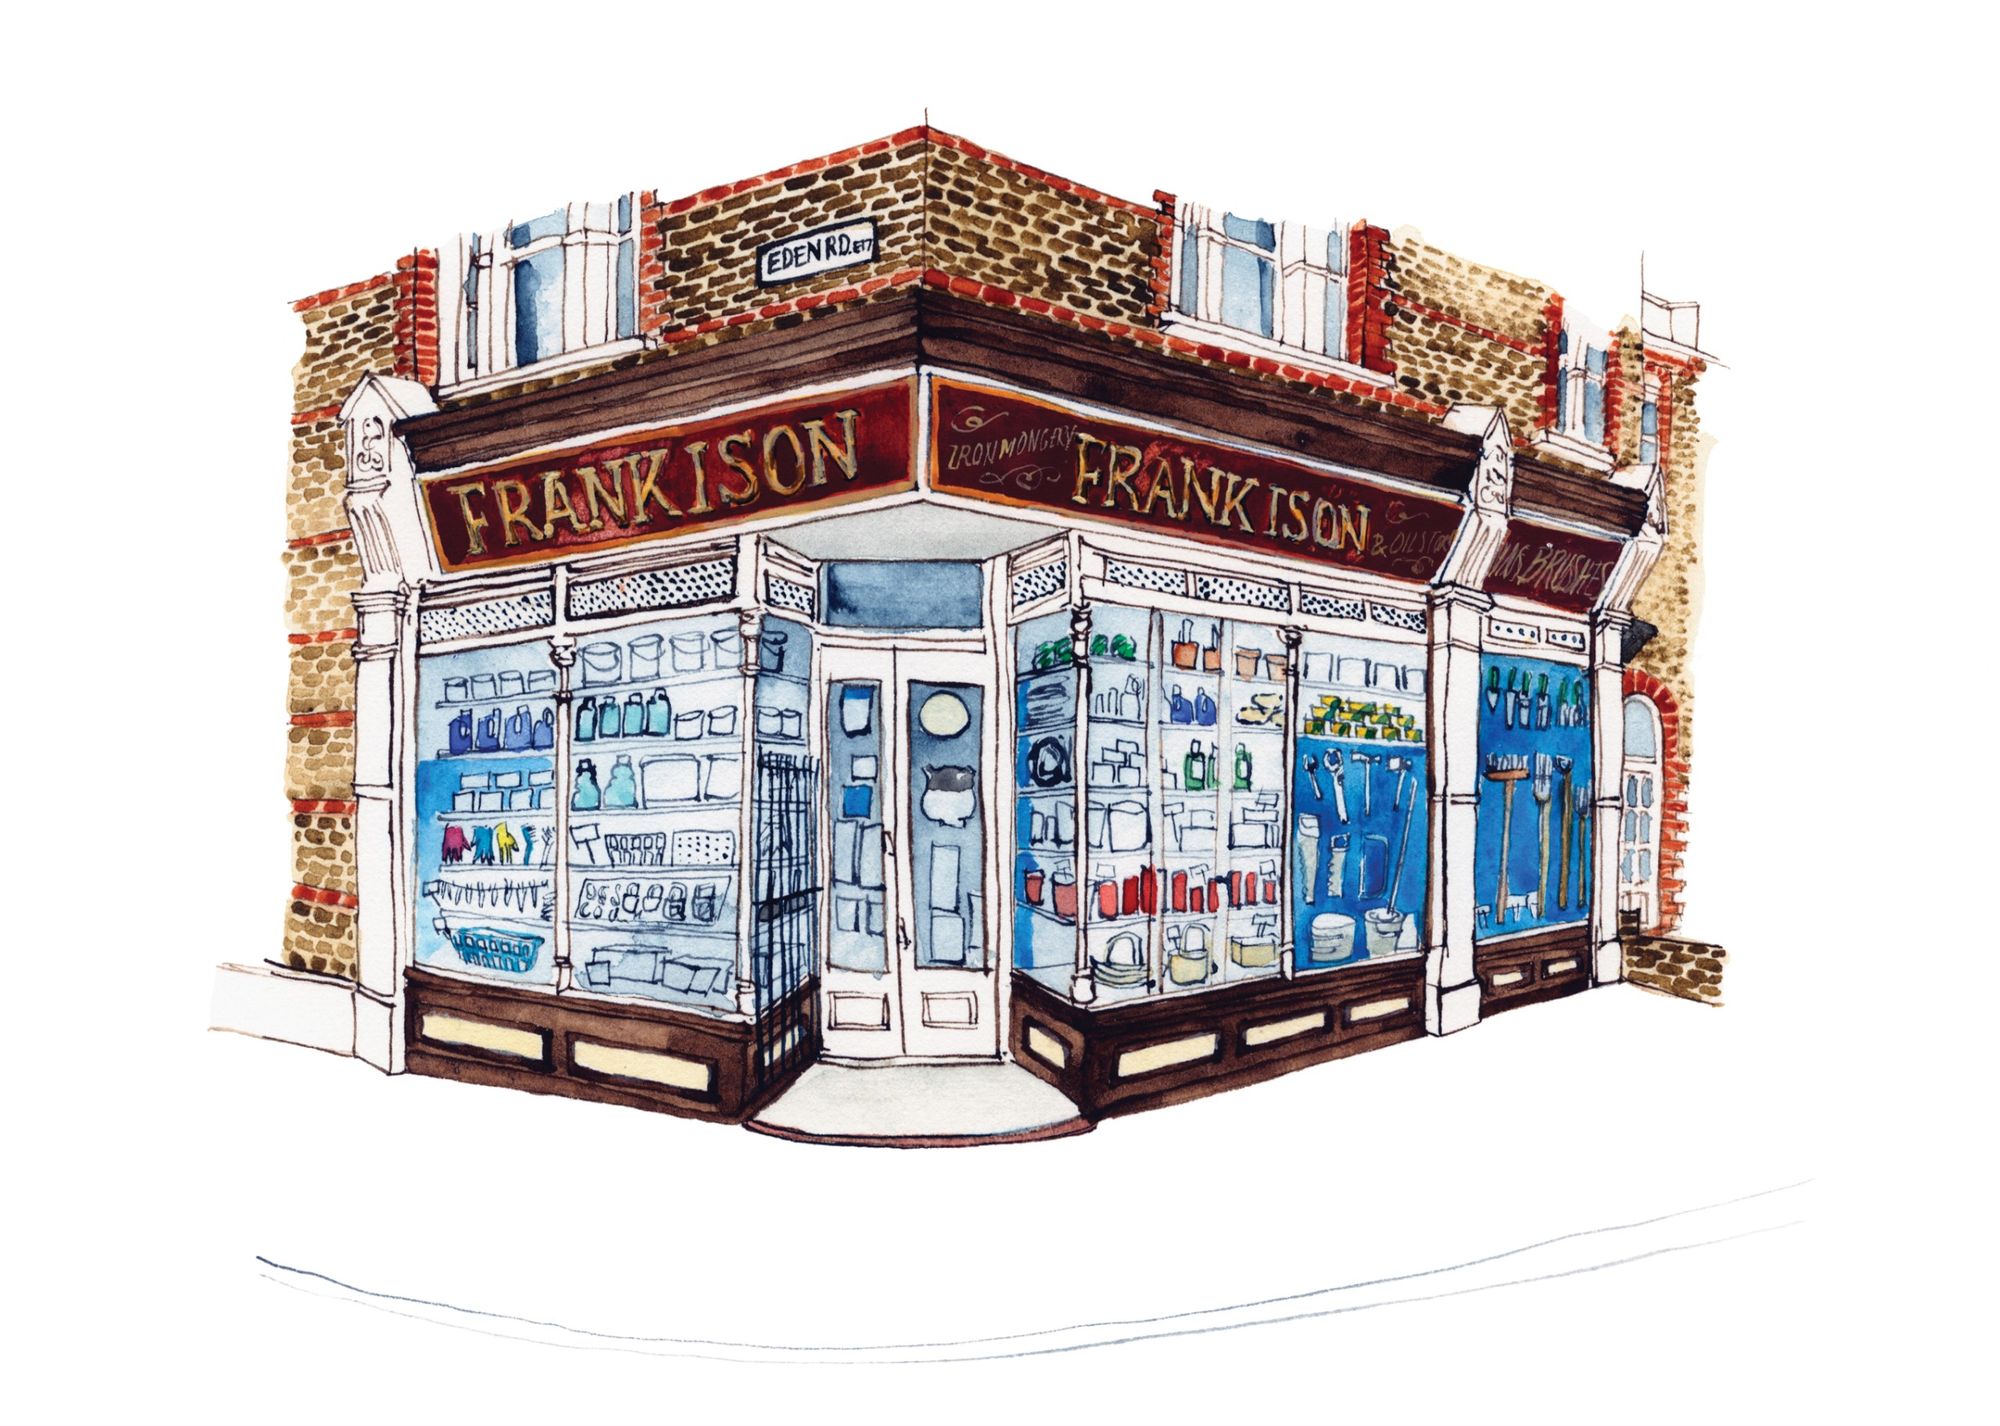 Eleanor Crow’s Brushes with London’s Shopfronts